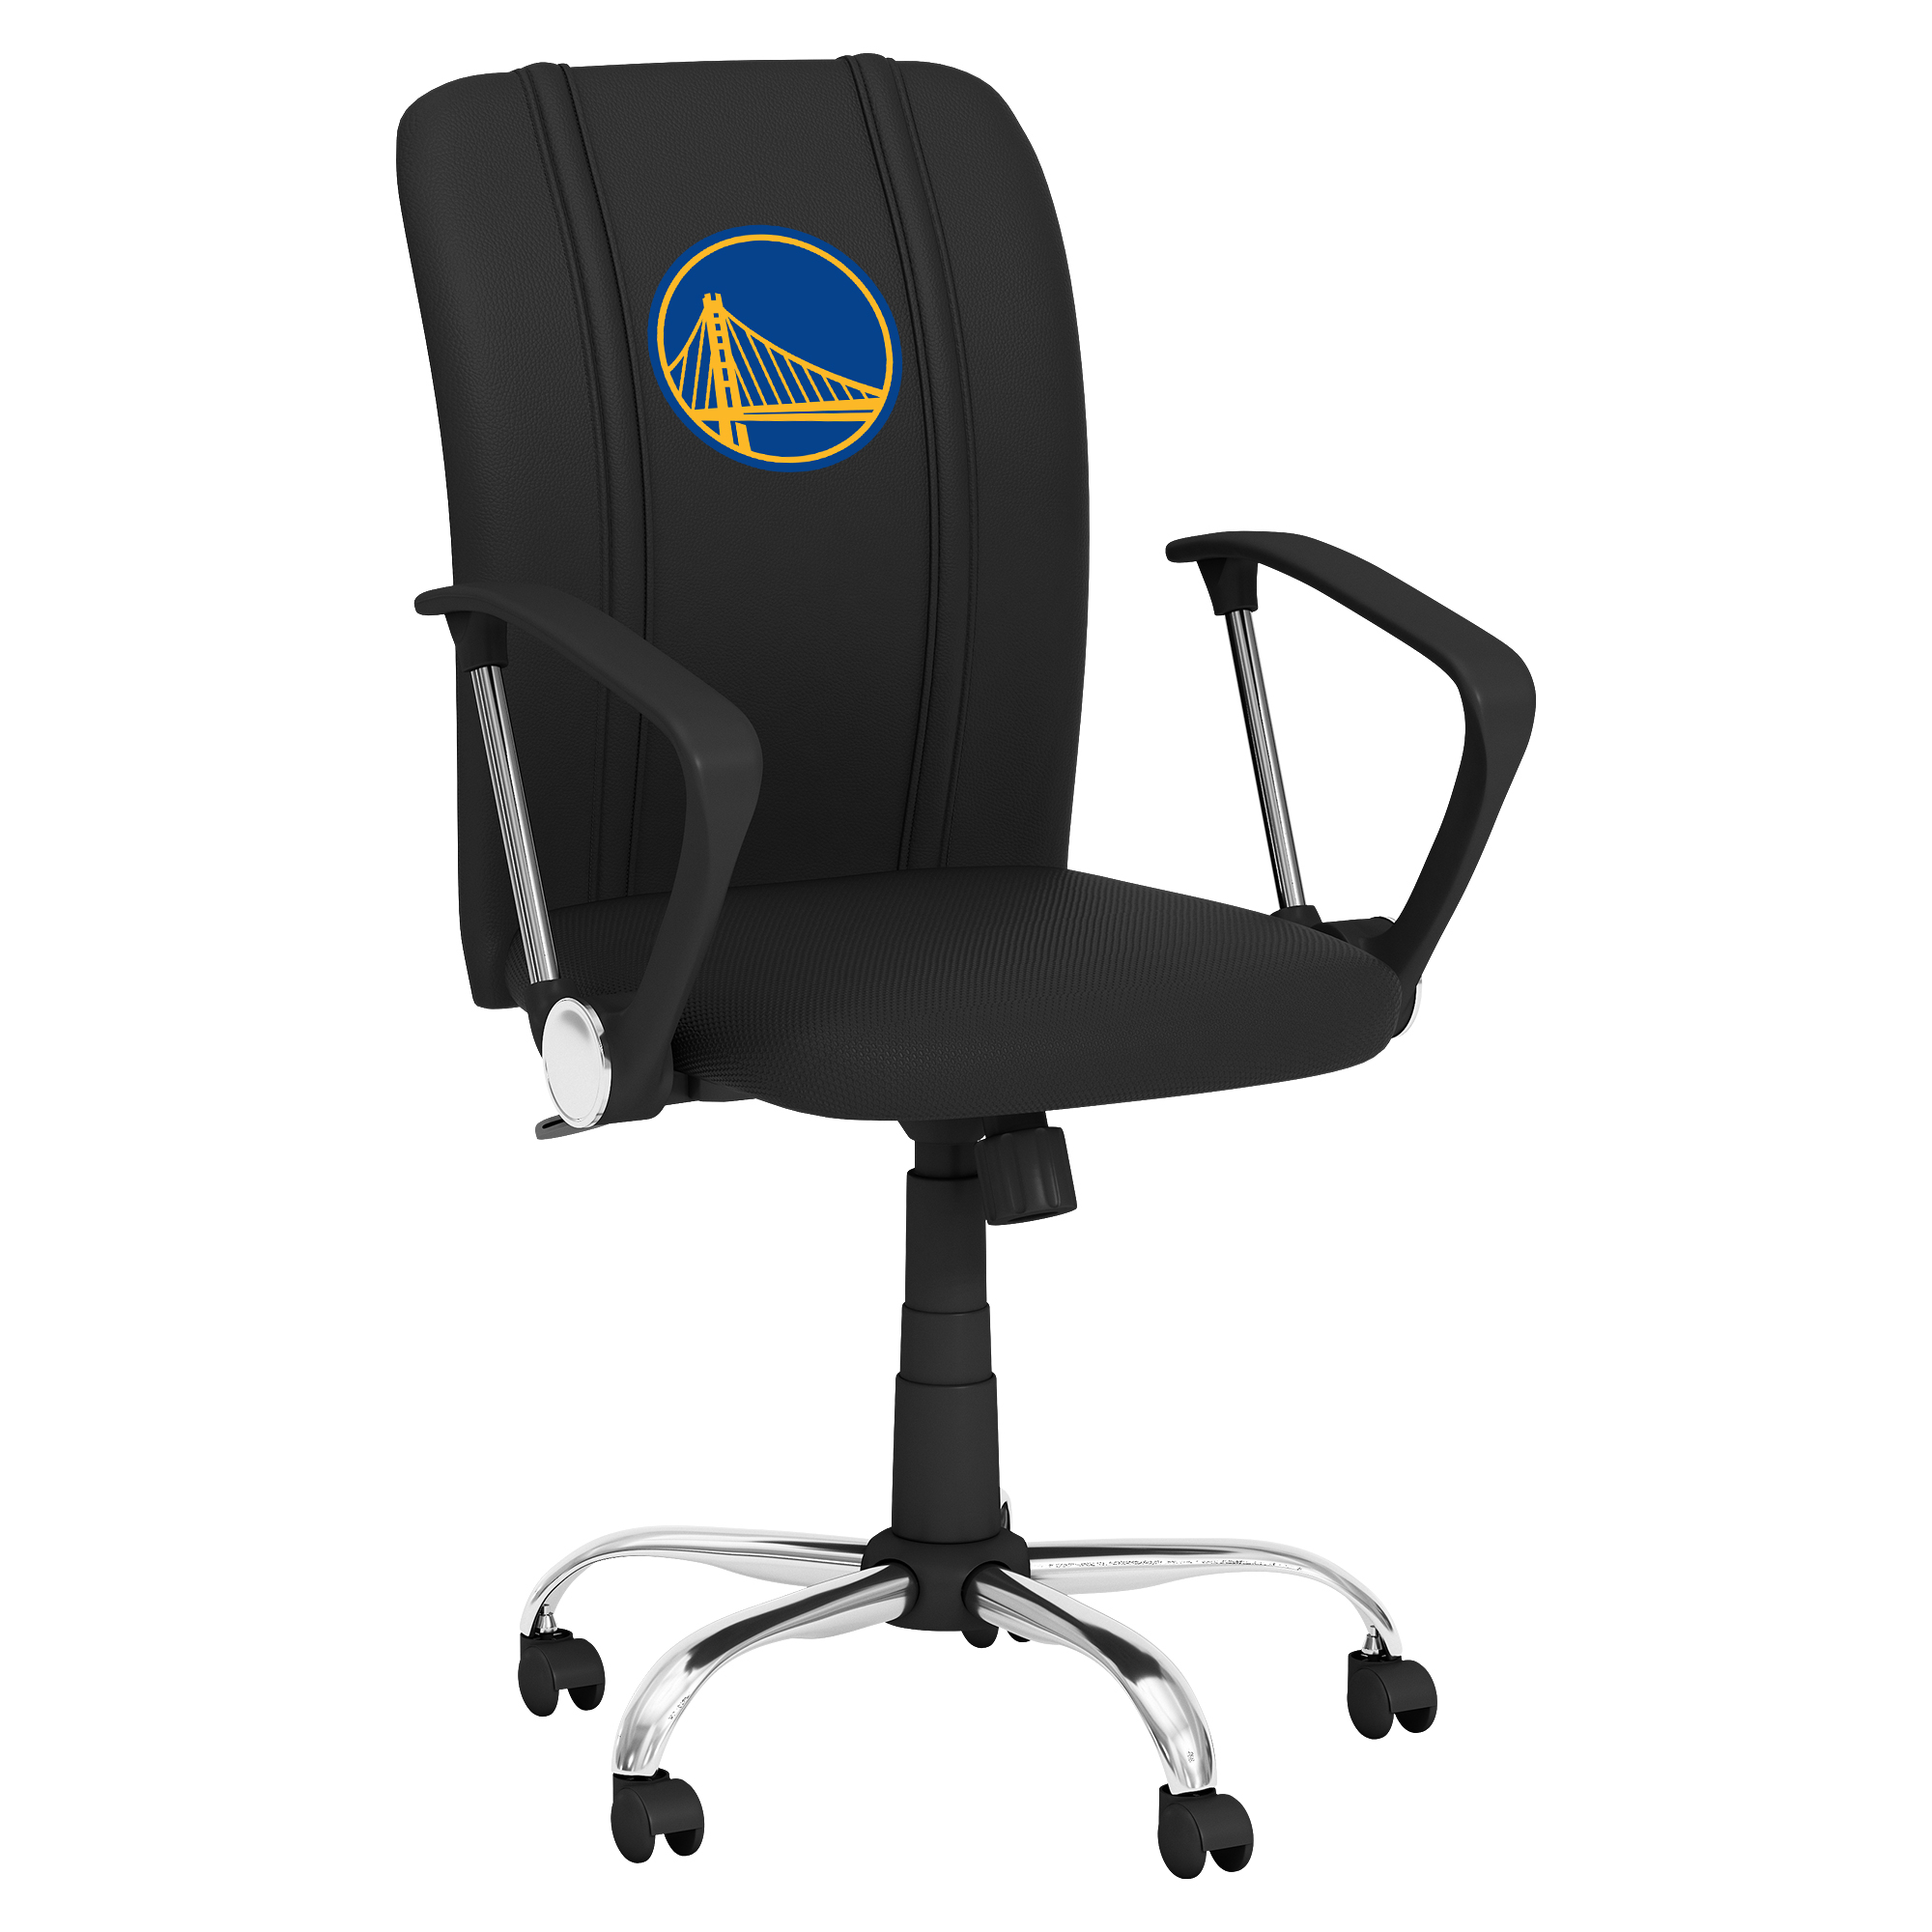 Golden State Warriors Curve Task Chair with Golden State Warriors Logo